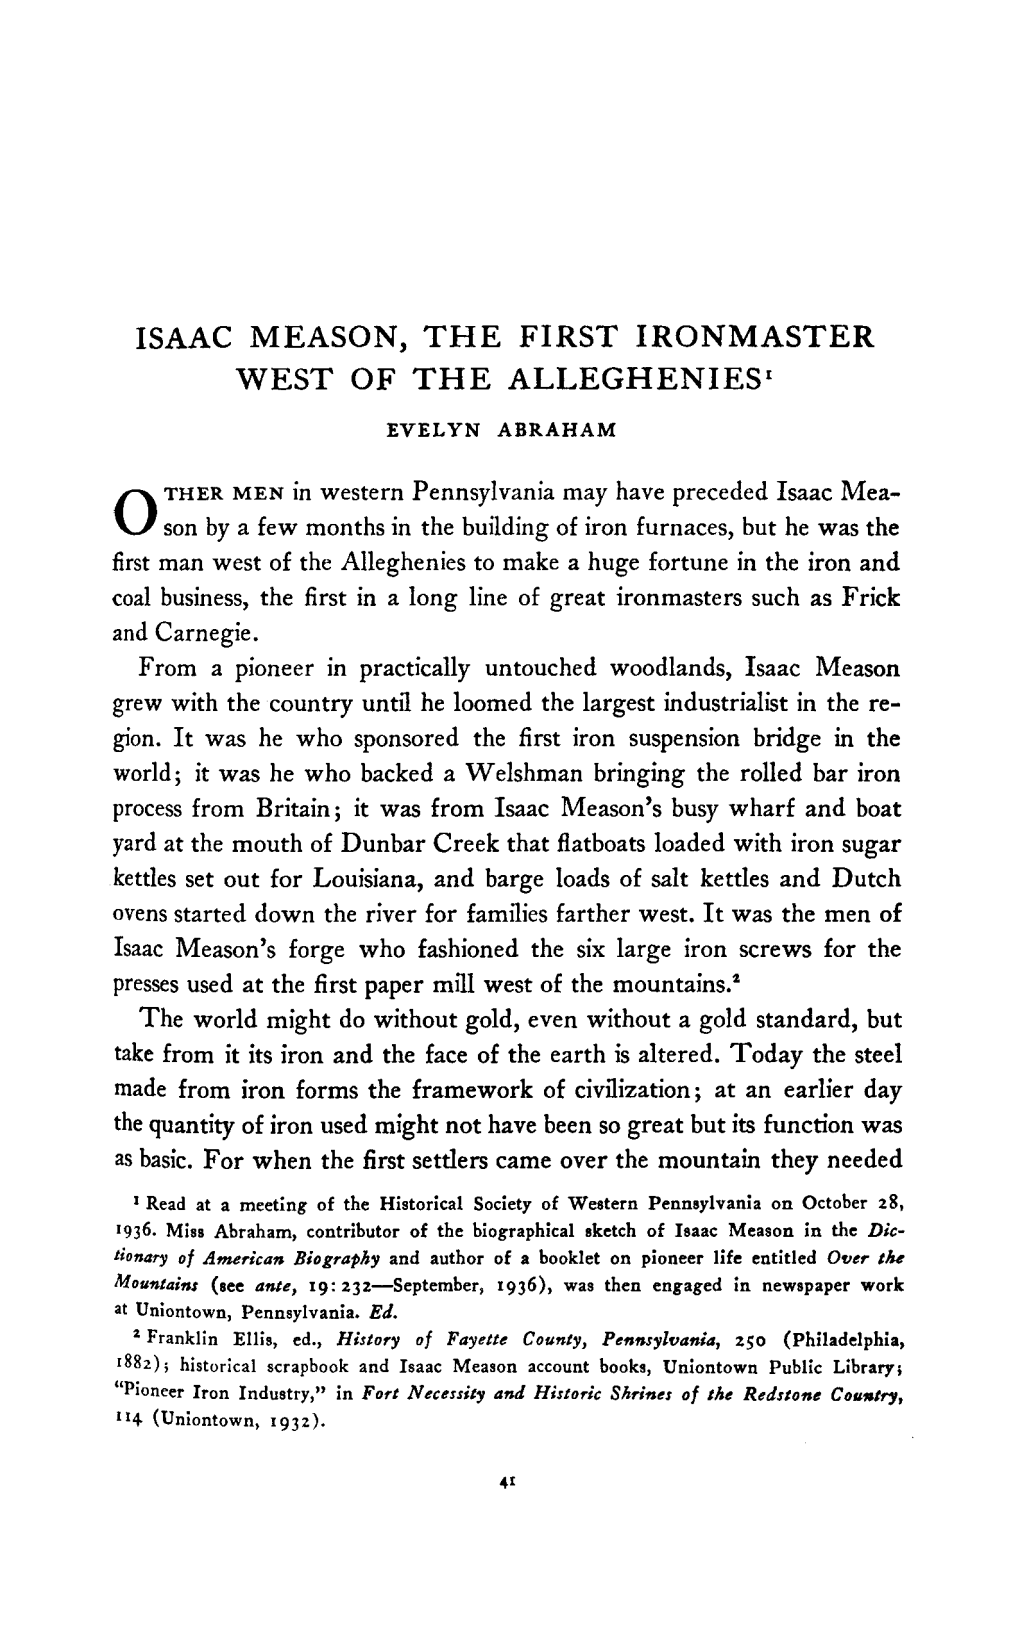 Isaac Meason, the First Ironmaster West of the Alleghenies1